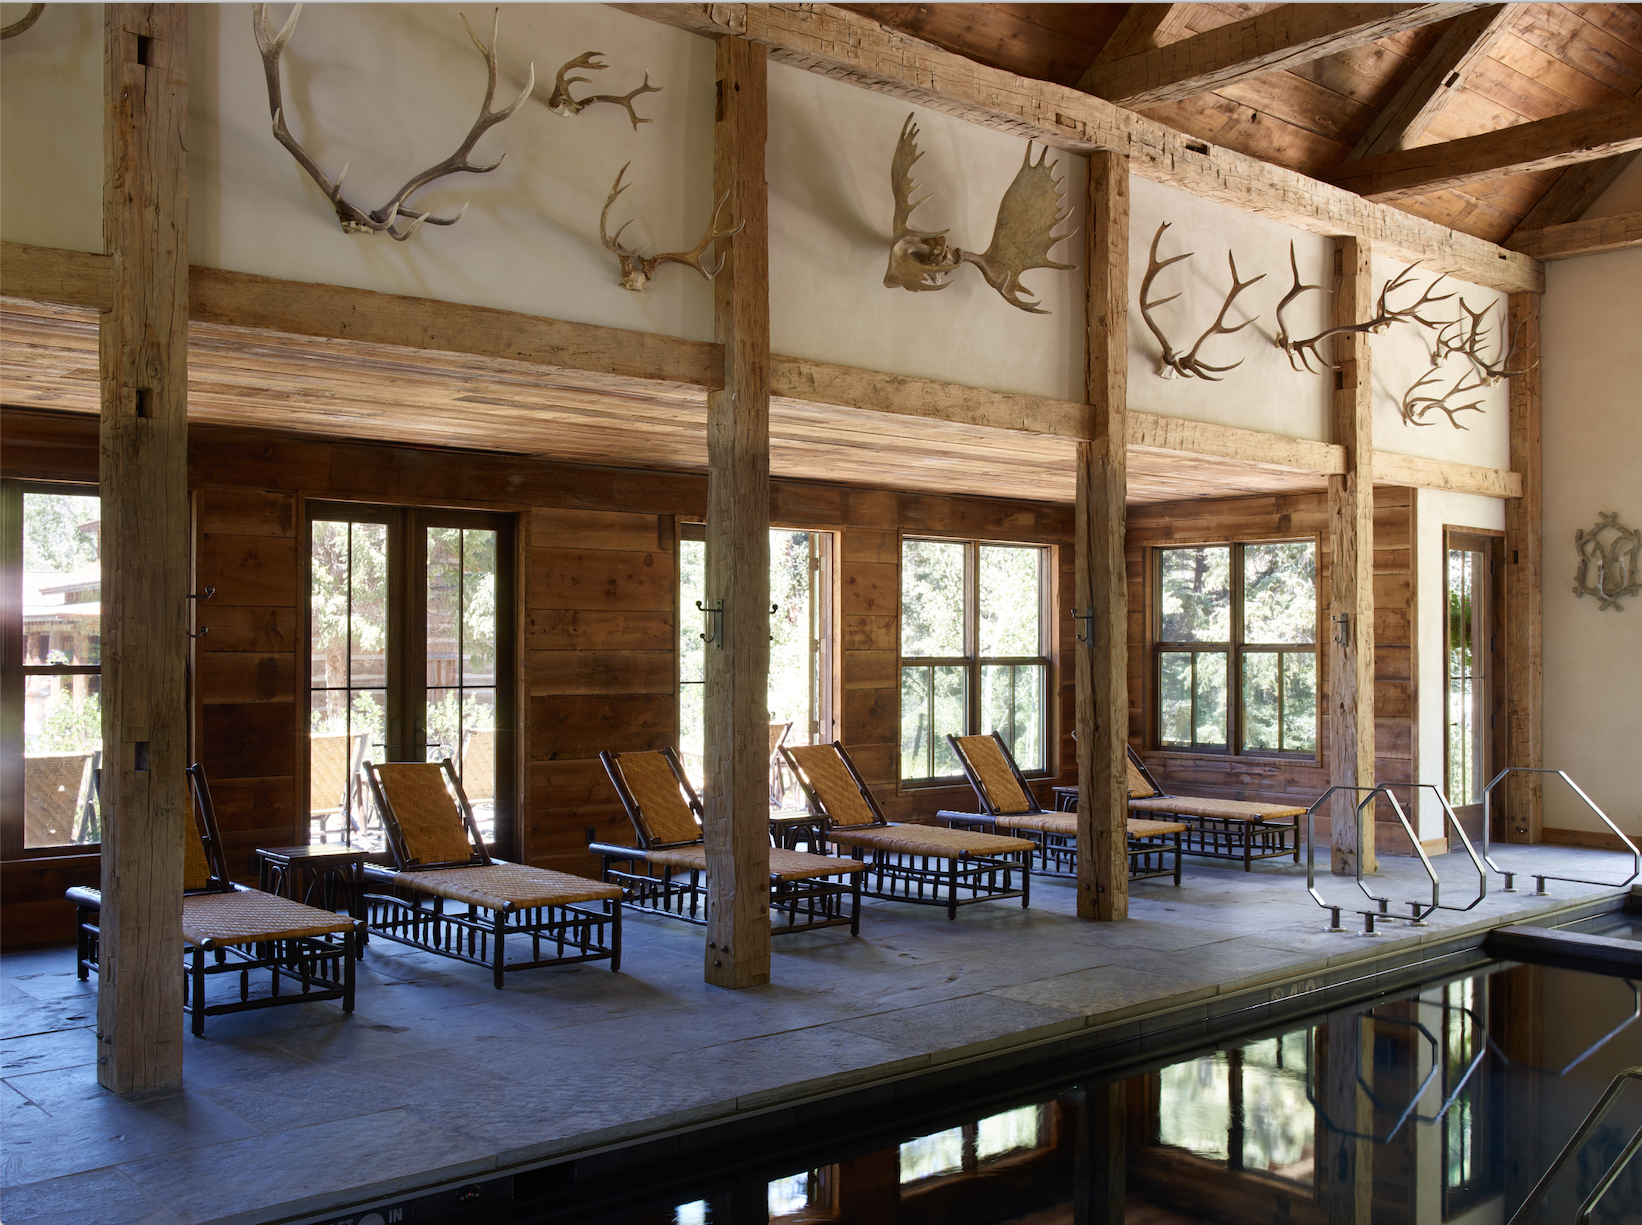   Indoor pool at Taylor River Lodge (photo credit: Eleven Experience)  